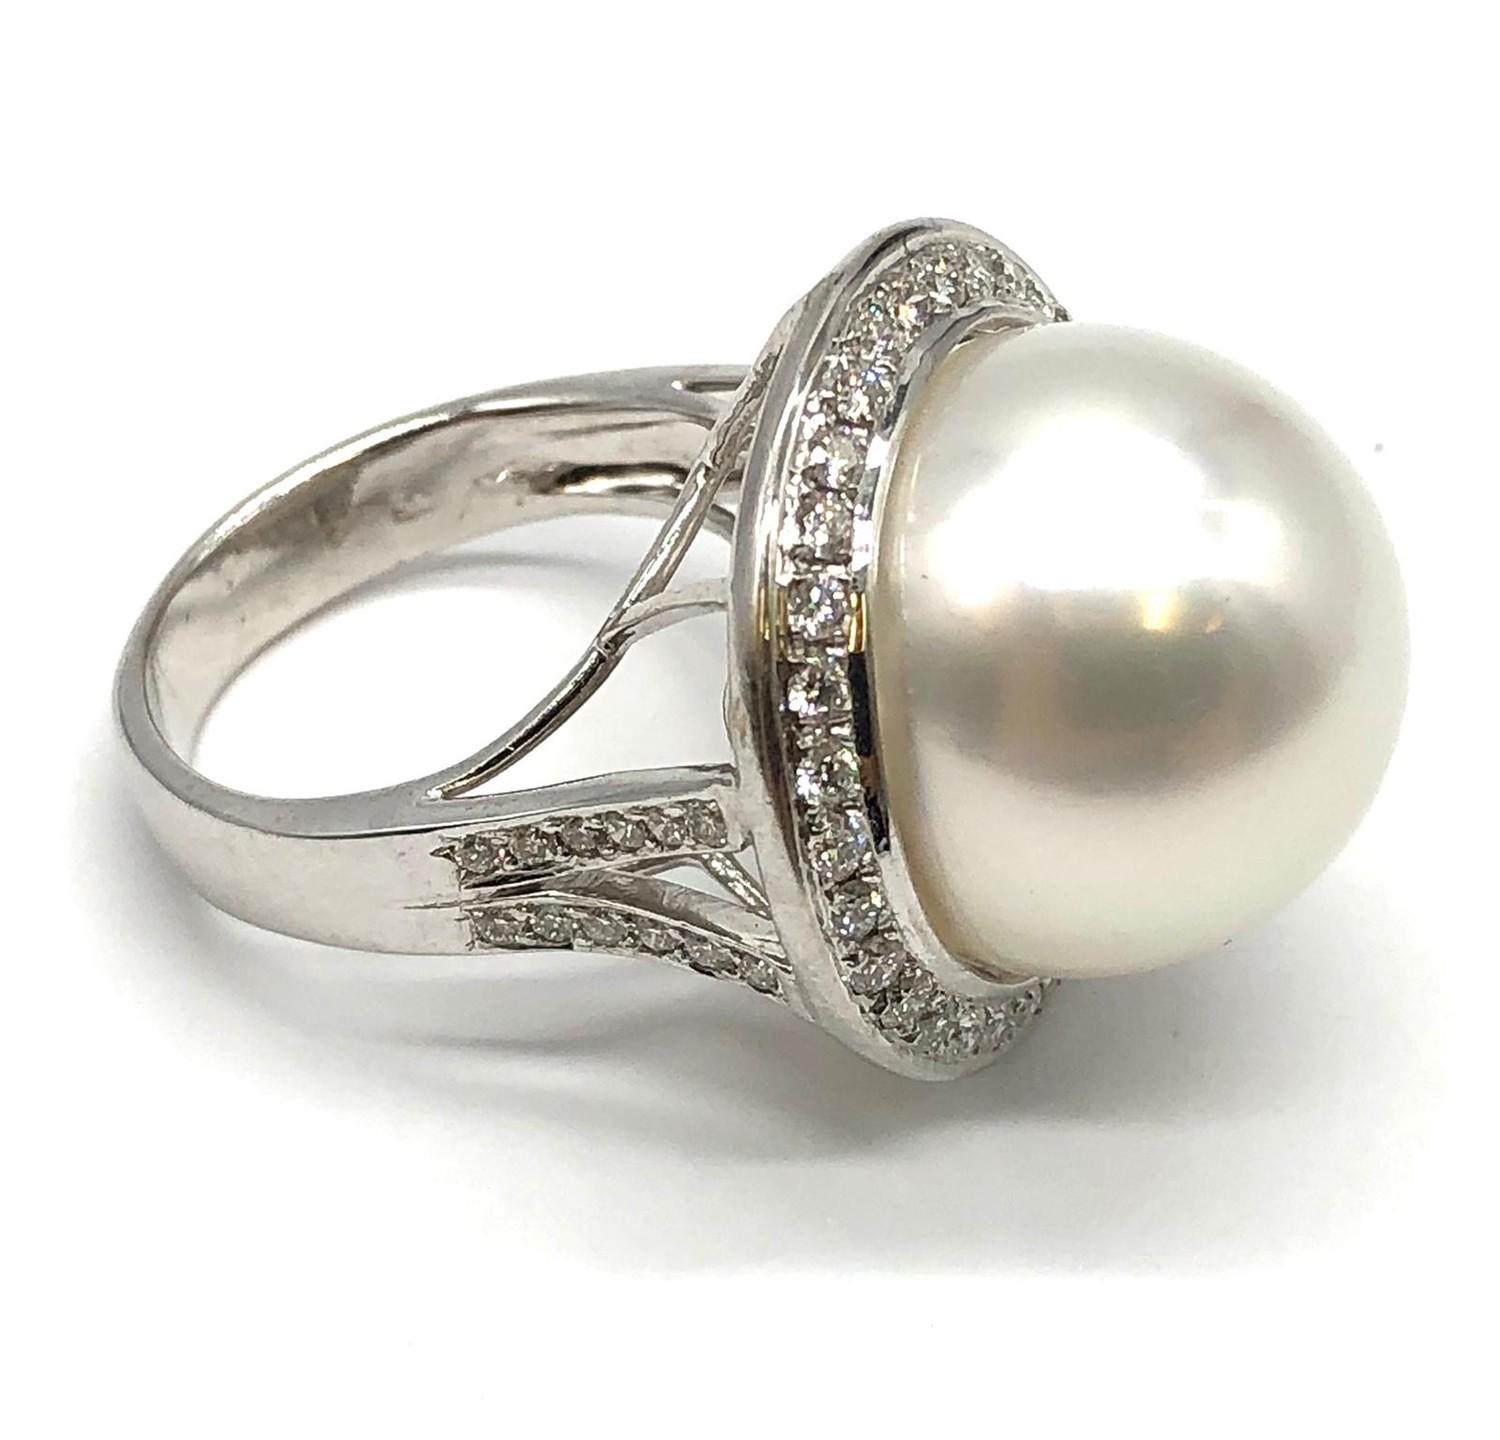 A large Kimoto pearl (17mm diameter) ring set in diamond and 18ct white gold ring, weight 14.43g and - Image 8 of 13